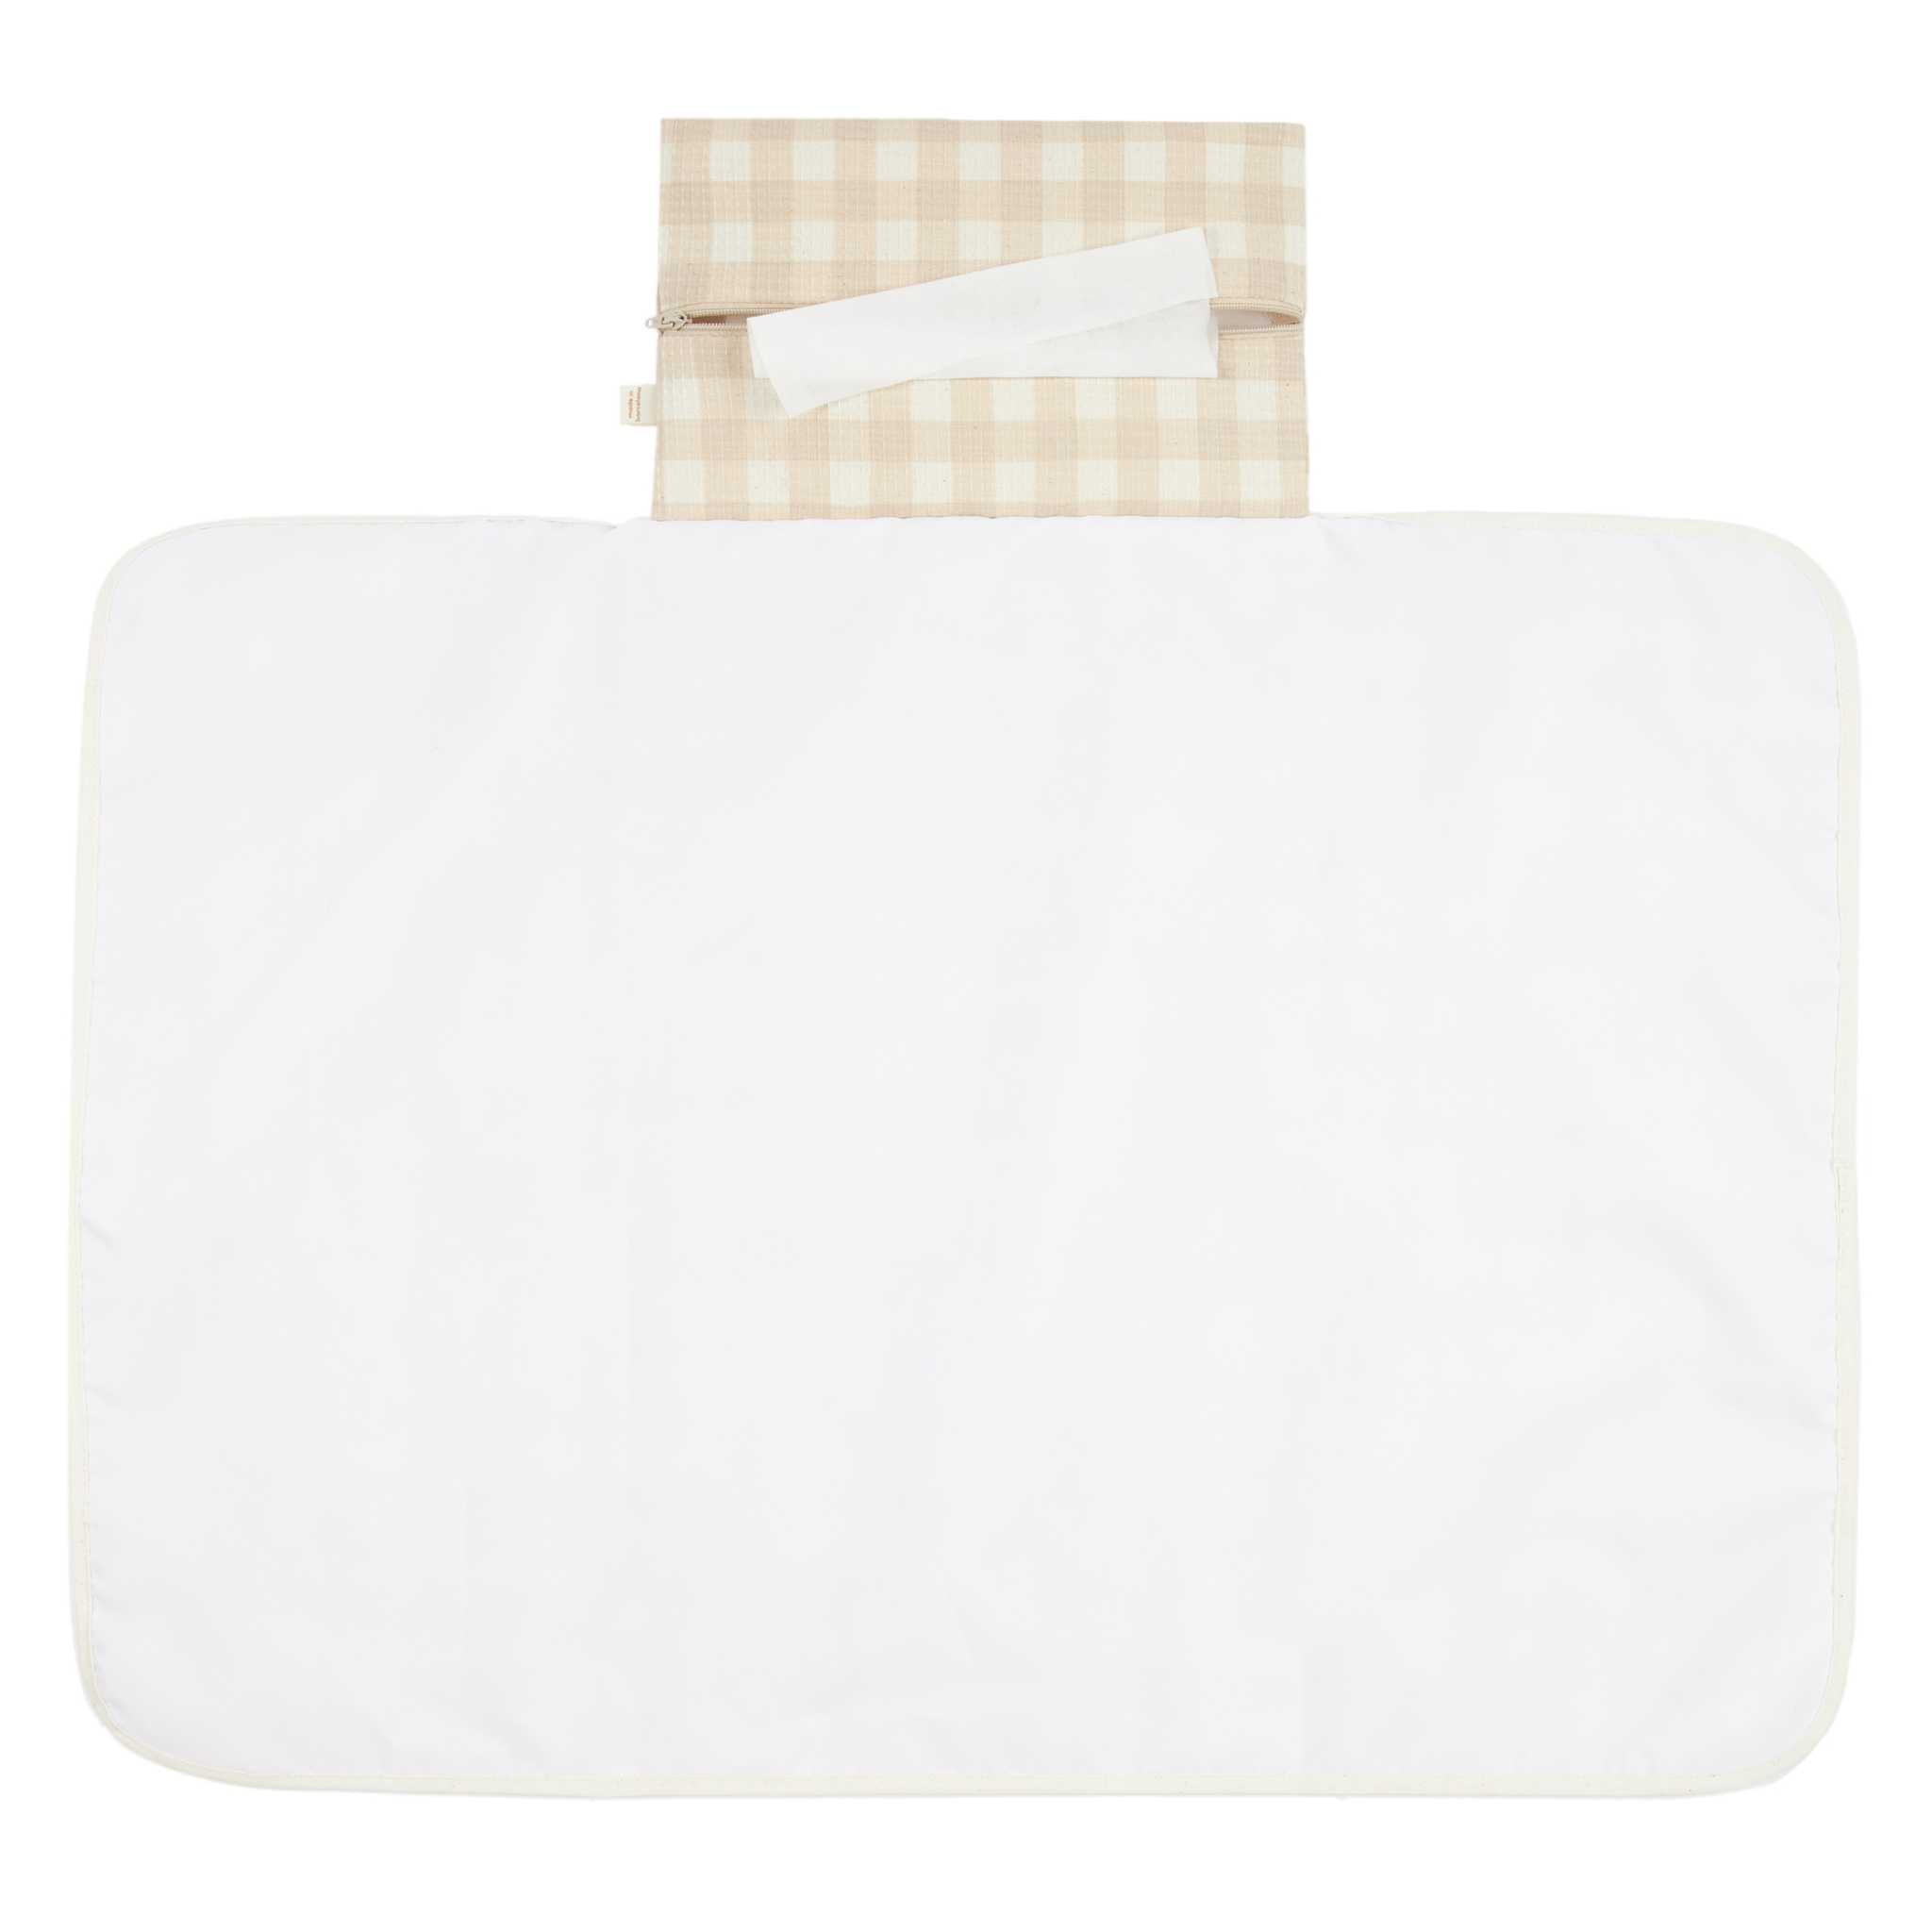 Nobodinoz Mozart Changing Pad - Ivory Checks - Opended Up